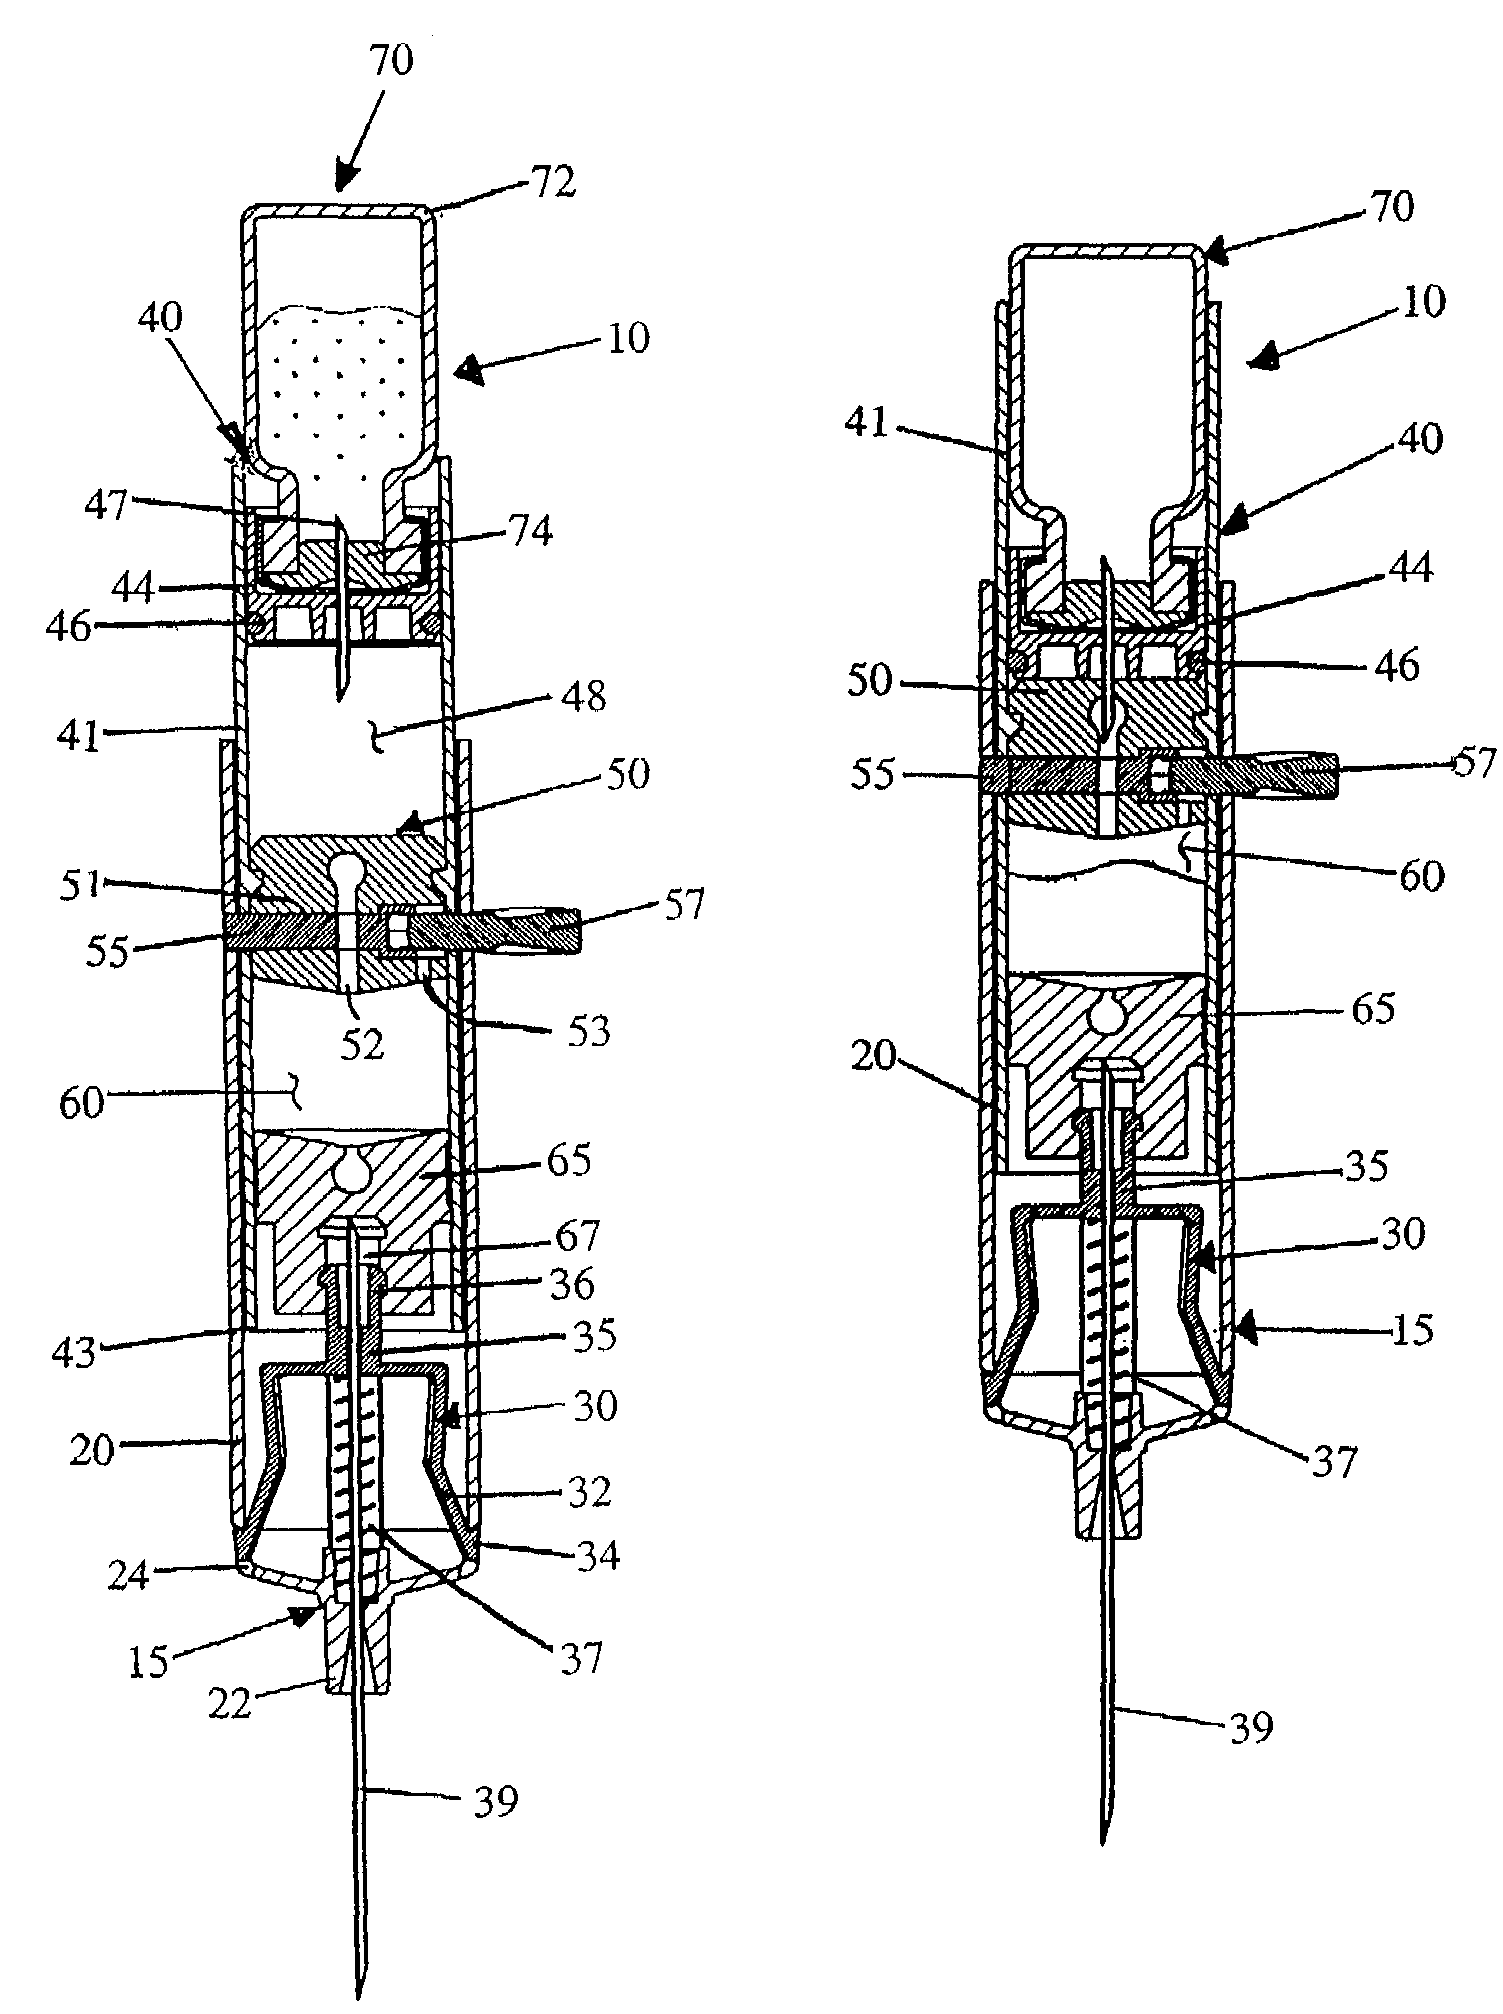 Pre-filled safety vial injector